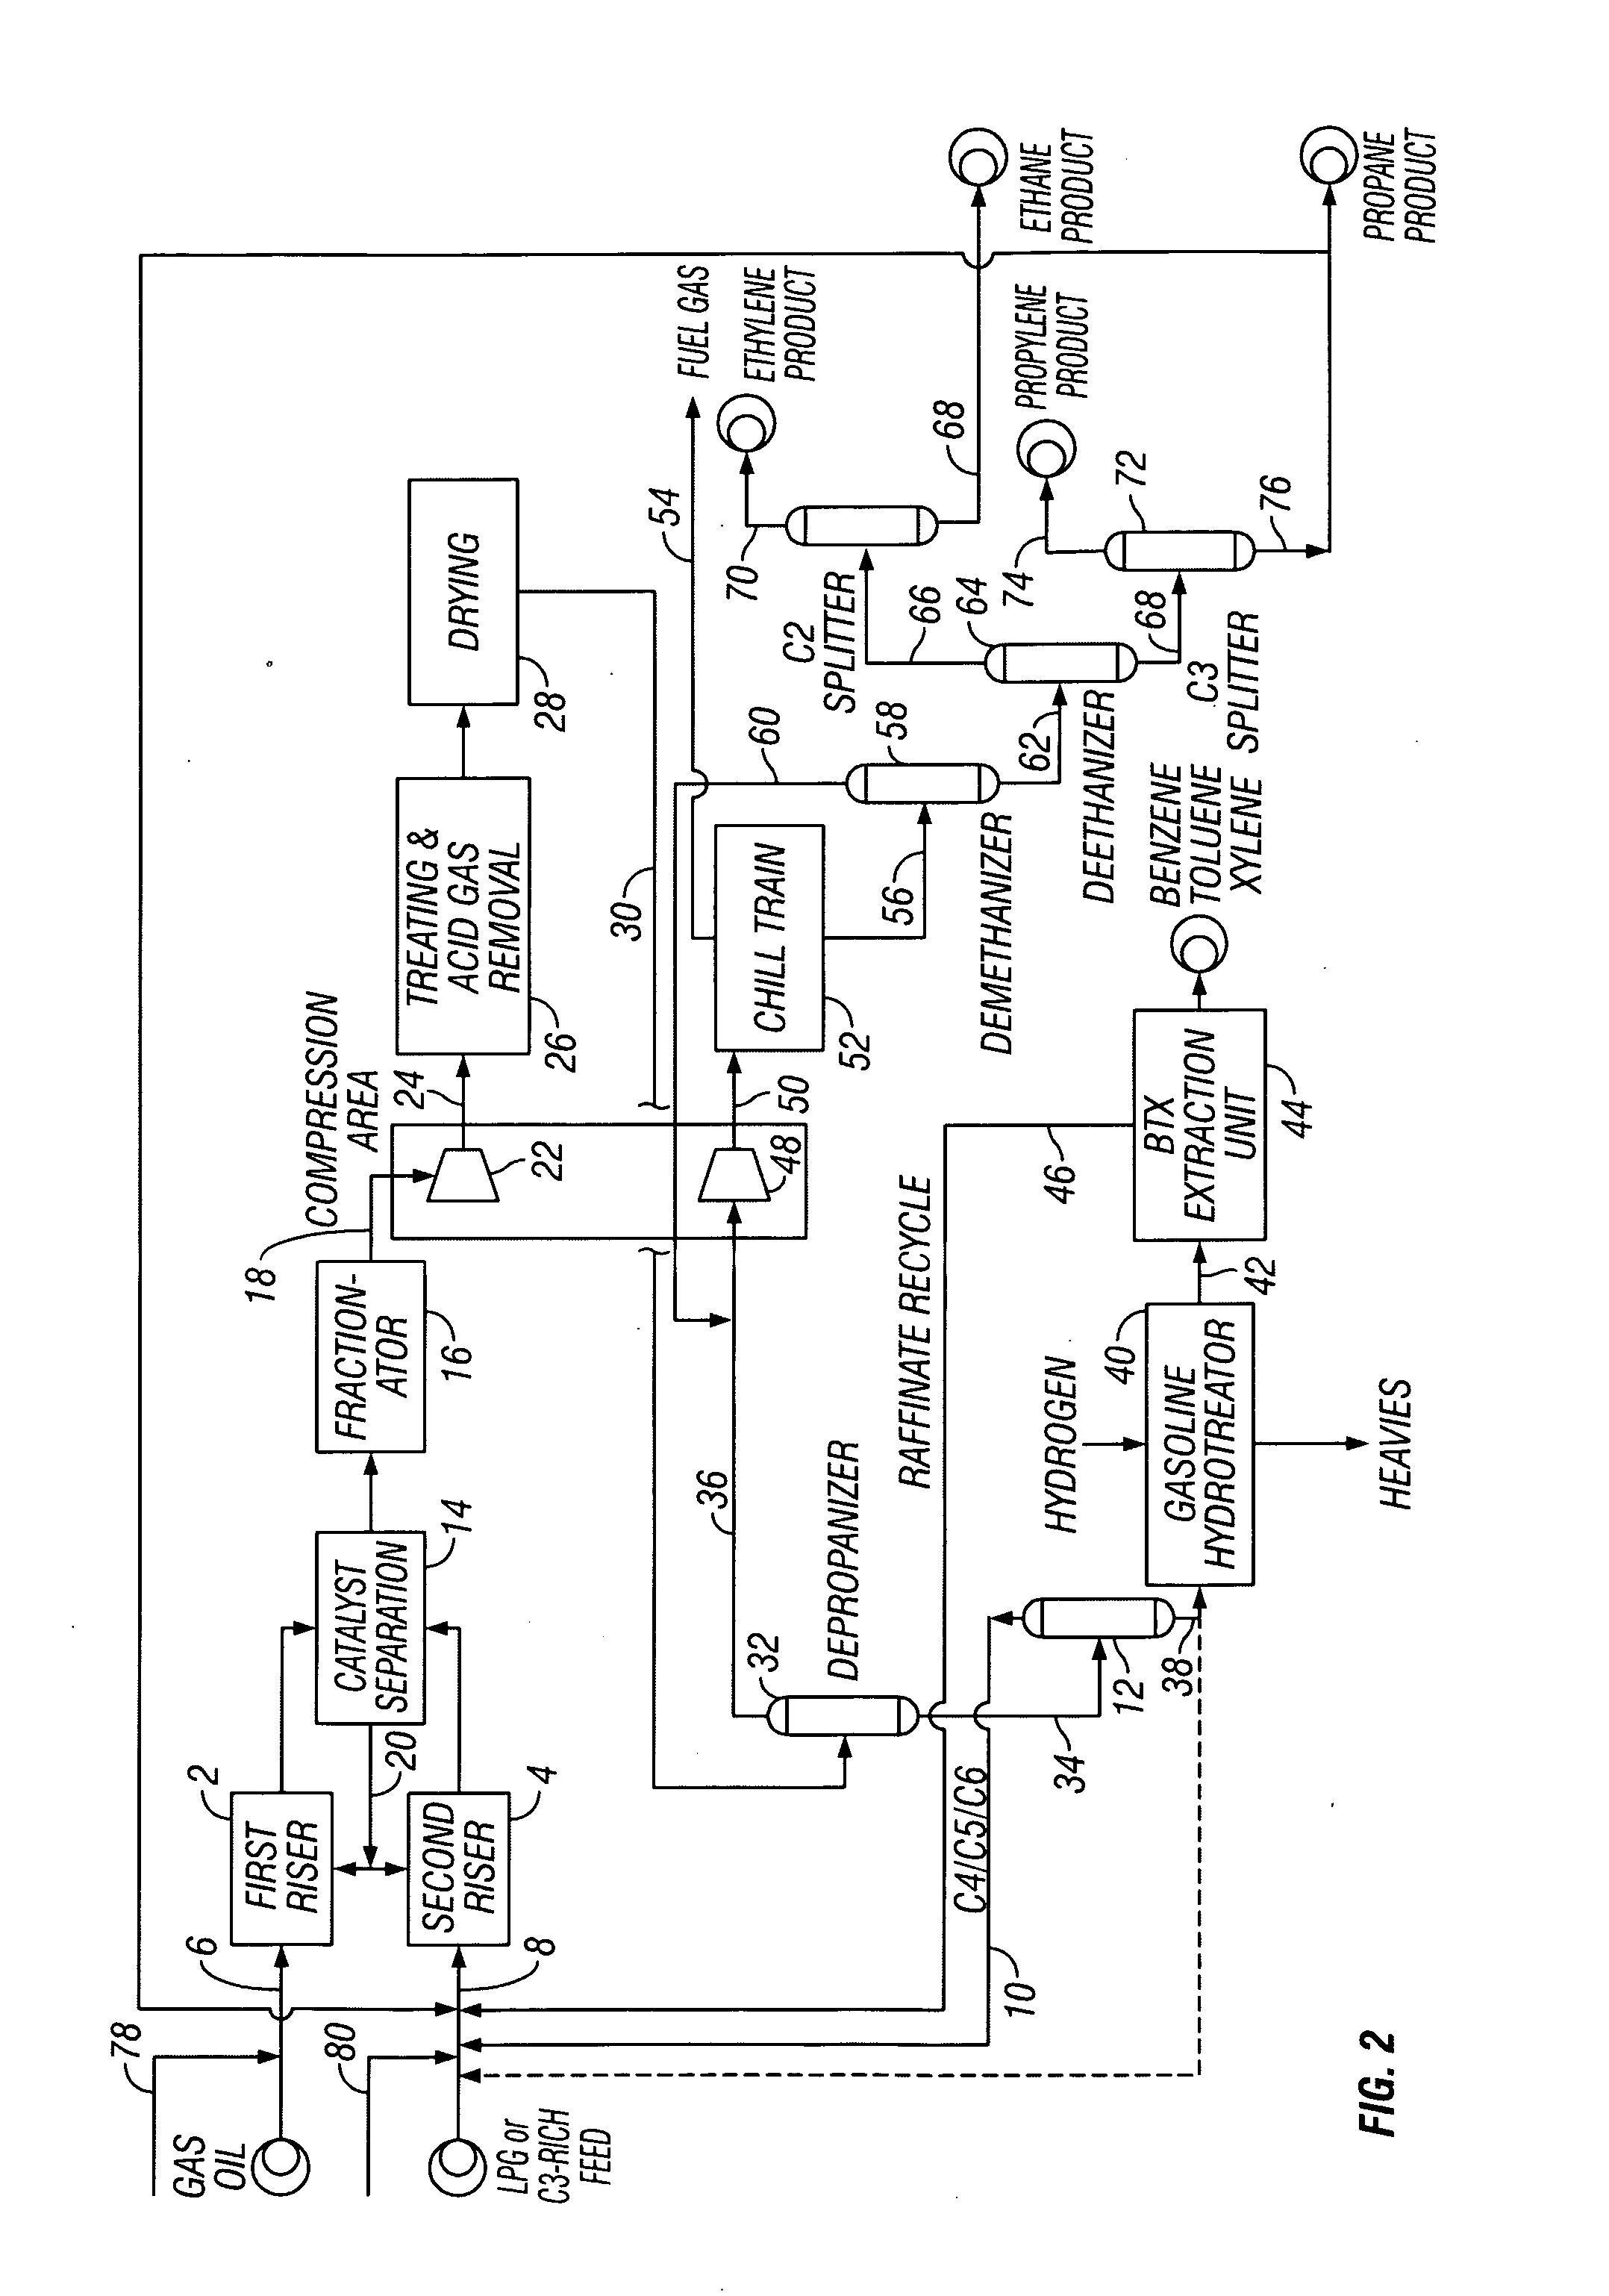 FCC process for converting C3/C4 feeds to olefins and aromatics